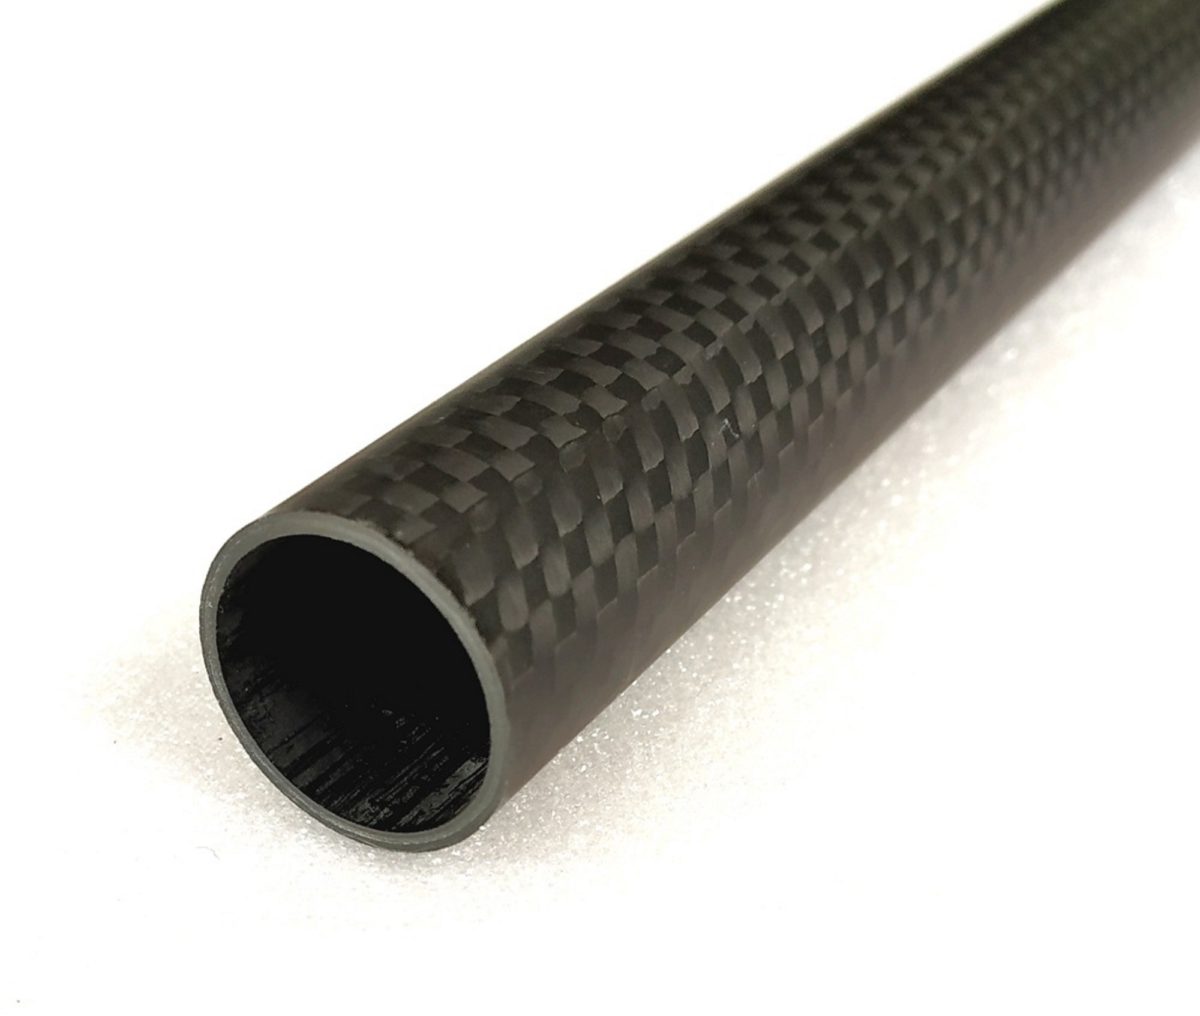 uxcell Carbon Fiber Round Tube 6mm x 4mm x 200mm 3K Roll Wrapped Glossy Surface for RC Airplane Quadcopter 4Pcs